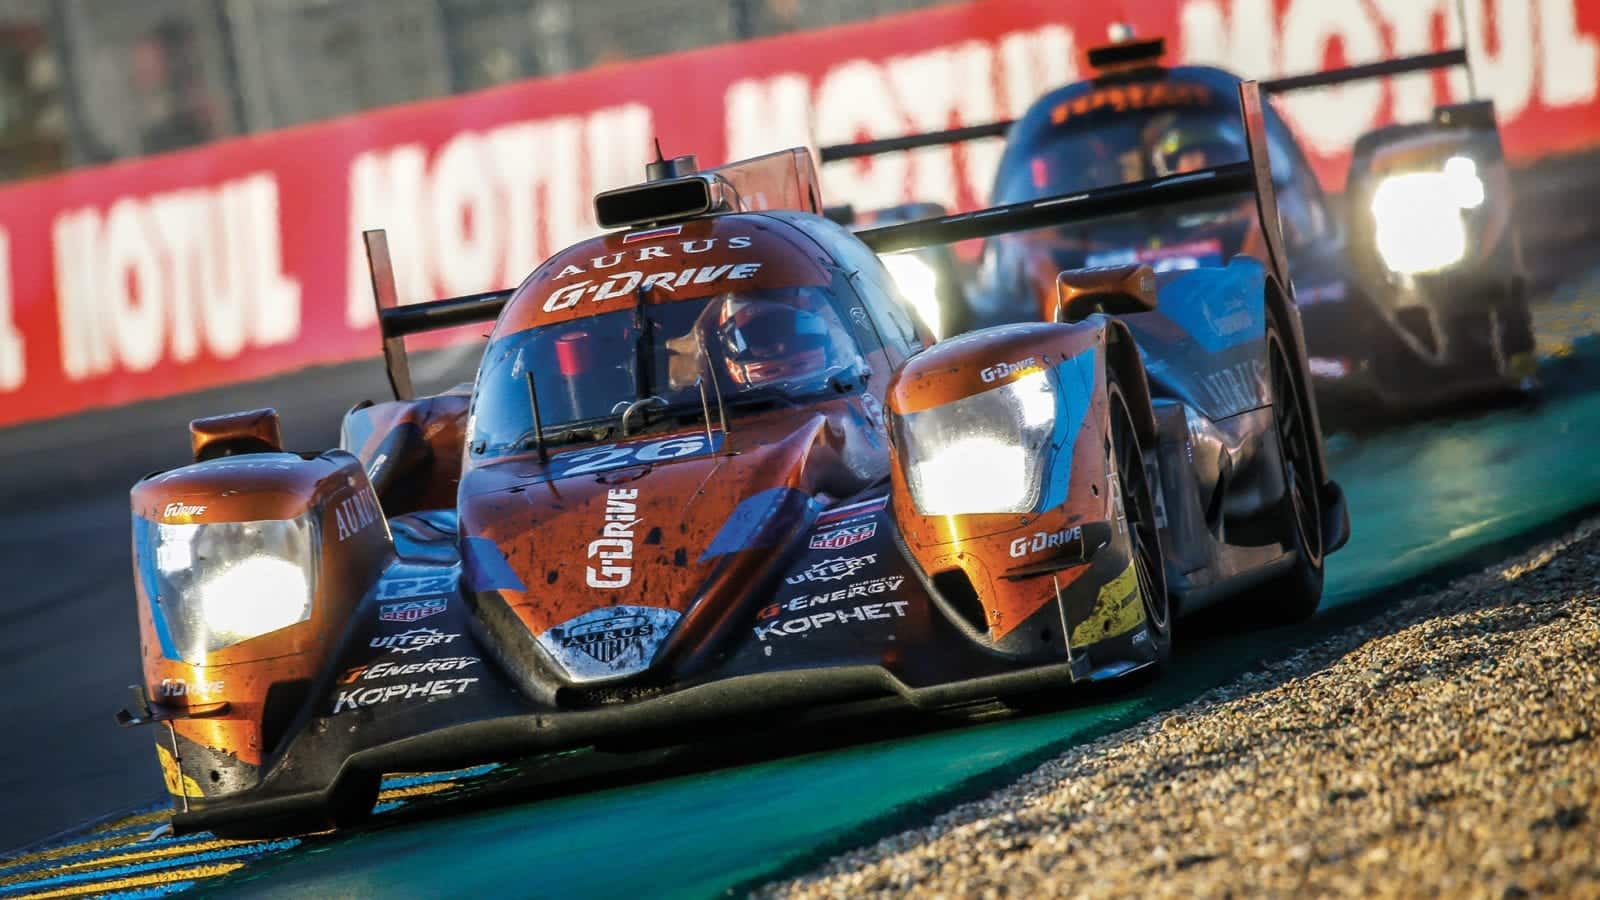 LMP2 cars at the Le Mans 24 Hours